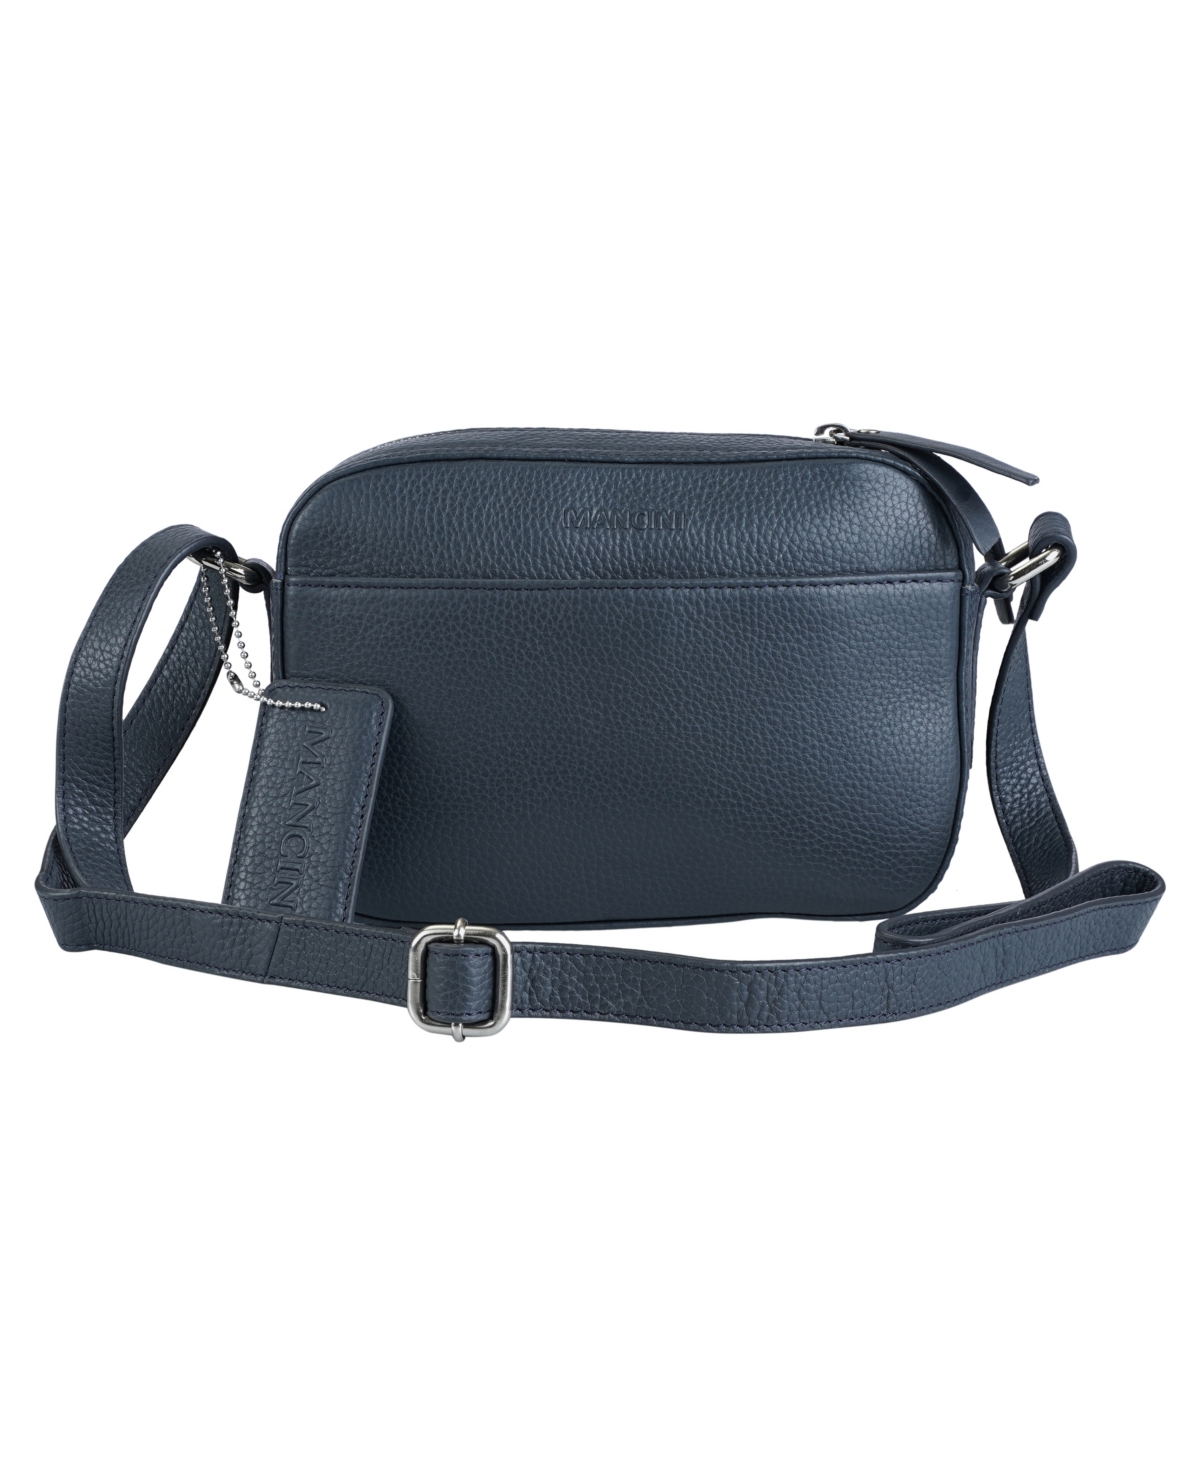 Mancini Pebbled Collection Clara Leather Small Crossbody Bag In Navy